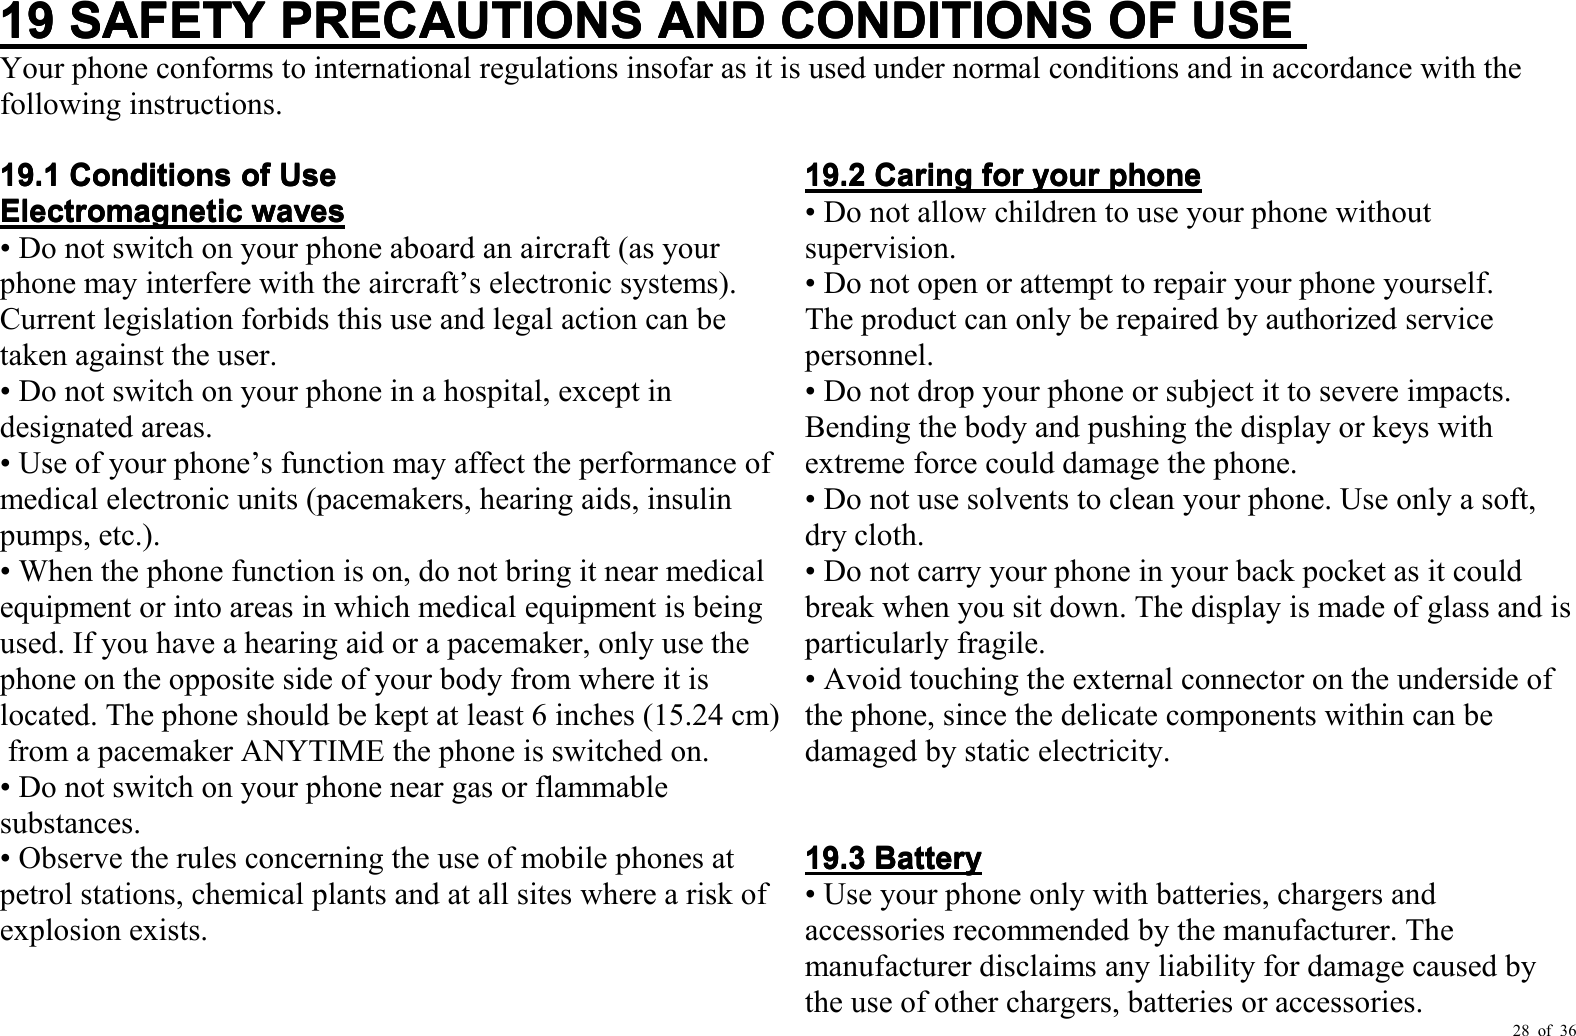 28 of 3619191919SAFETYSAFETYSAFETYSAFETYPRECAUTIONSPRECAUTIONSPRECAUTIONSPRECAUTIONSANDANDANDANDCONDITIONSCONDITIONSCONDITIONSCONDITIONSOFOFOFOFUSEUSEUSEUSEYour phone conforms to international regulations insofar as it is used under normal conditions and in ac cordance with thefollowing instructions.19.119.119.119.1ConditionsConditionsConditionsConditionsofofofofUseUseUseUseElectromagneticElectromagneticElectromagneticElectromagneticwaveswaveswaveswaves• Do not switch on your phone aboard an aircraft (as yourphone may interfere with the aircraft ’ s electronic systems).Current legislation forbids this use and legal action can betaken against the user.• Do not switch on your phone in a hospital, except indesignated areas.• Use of your phone ’ s function may affect the performance ofmedical electronic units (pacemakers, hearing aids, insulinpumps, etc.).• When the phone function is on, do not bring it near medicalequipment or into areas in which medical equipment is beingused. If you have a hearing aid or a pacemaker, only use thephone on the opposite side of your body from where it islocated. The phone should be kept at least 6 inches (15.24 cm )from a pacemaker ANYTIME the phone is switched on.• Do not switch on your phone near gas or flammablesubstances.• Observe the rules concerning the use of mobile phones atpetrol stations, chemical plants and at all sites where a risk ofexplosion exists.19.219.219.219.2CaringCaringCaringCaringforforforforyouryouryouryourphonephonephonephone• Do not allow children to use your phone withoutsupervision.• Do not open or attempt to repair your phone yourself.The product can only be repaired by authorized servicepersonnel.• Do not drop your phone or subject it to severe impacts.Bending the body and pushing the display or keys withextreme force could damage the phone.• Do not use solvents to clean your phone. Use only a soft,dry cloth.• Do not carry your phone in your back pocket as it couldbreak when you sit down. The display is made of glass and isparticularly fragile.• Avoid touching the external connector on the underside ofthe phone, since the delicate components within can bedamaged by static electricity.19.319.319.319.3BatteryBatteryBatteryBattery• Use your phone only with batteries, chargers andaccessories recommended by the manufacturer. Themanufacturer disclaims any liability for damage caused bythe use of other chargers, batteries or accessories.